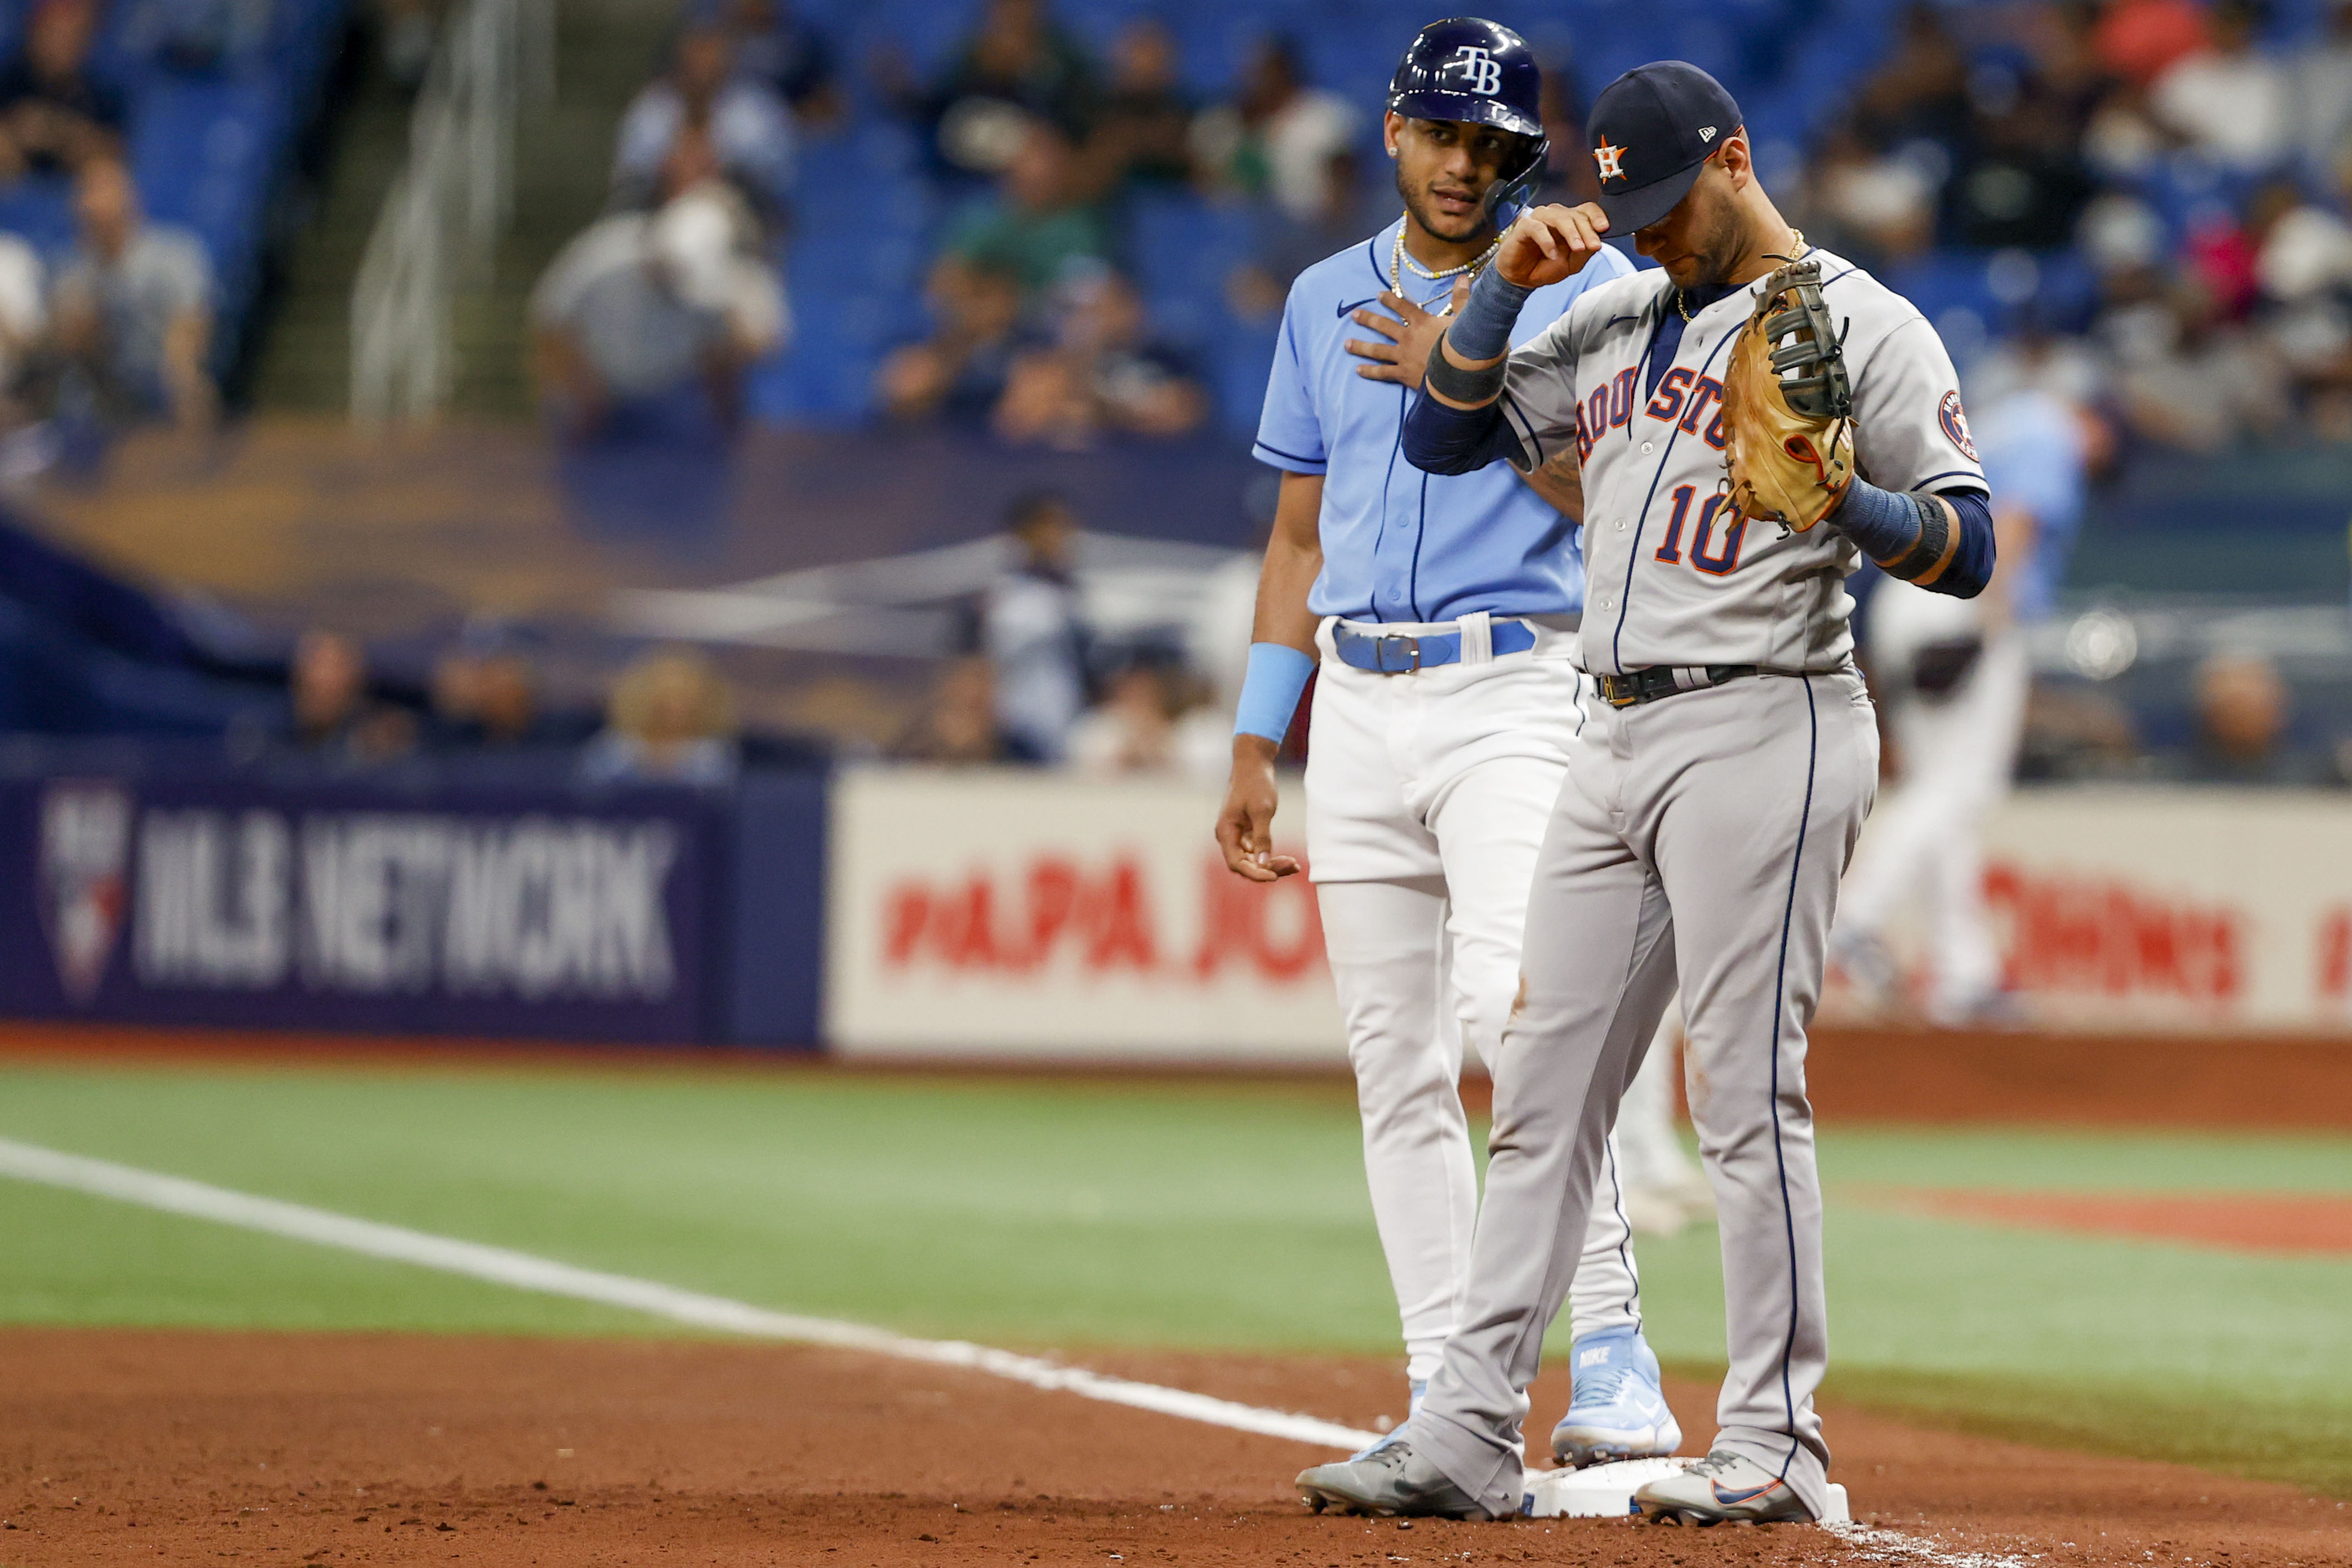 Jose Siri is missed by Astros, welcomed by Rays